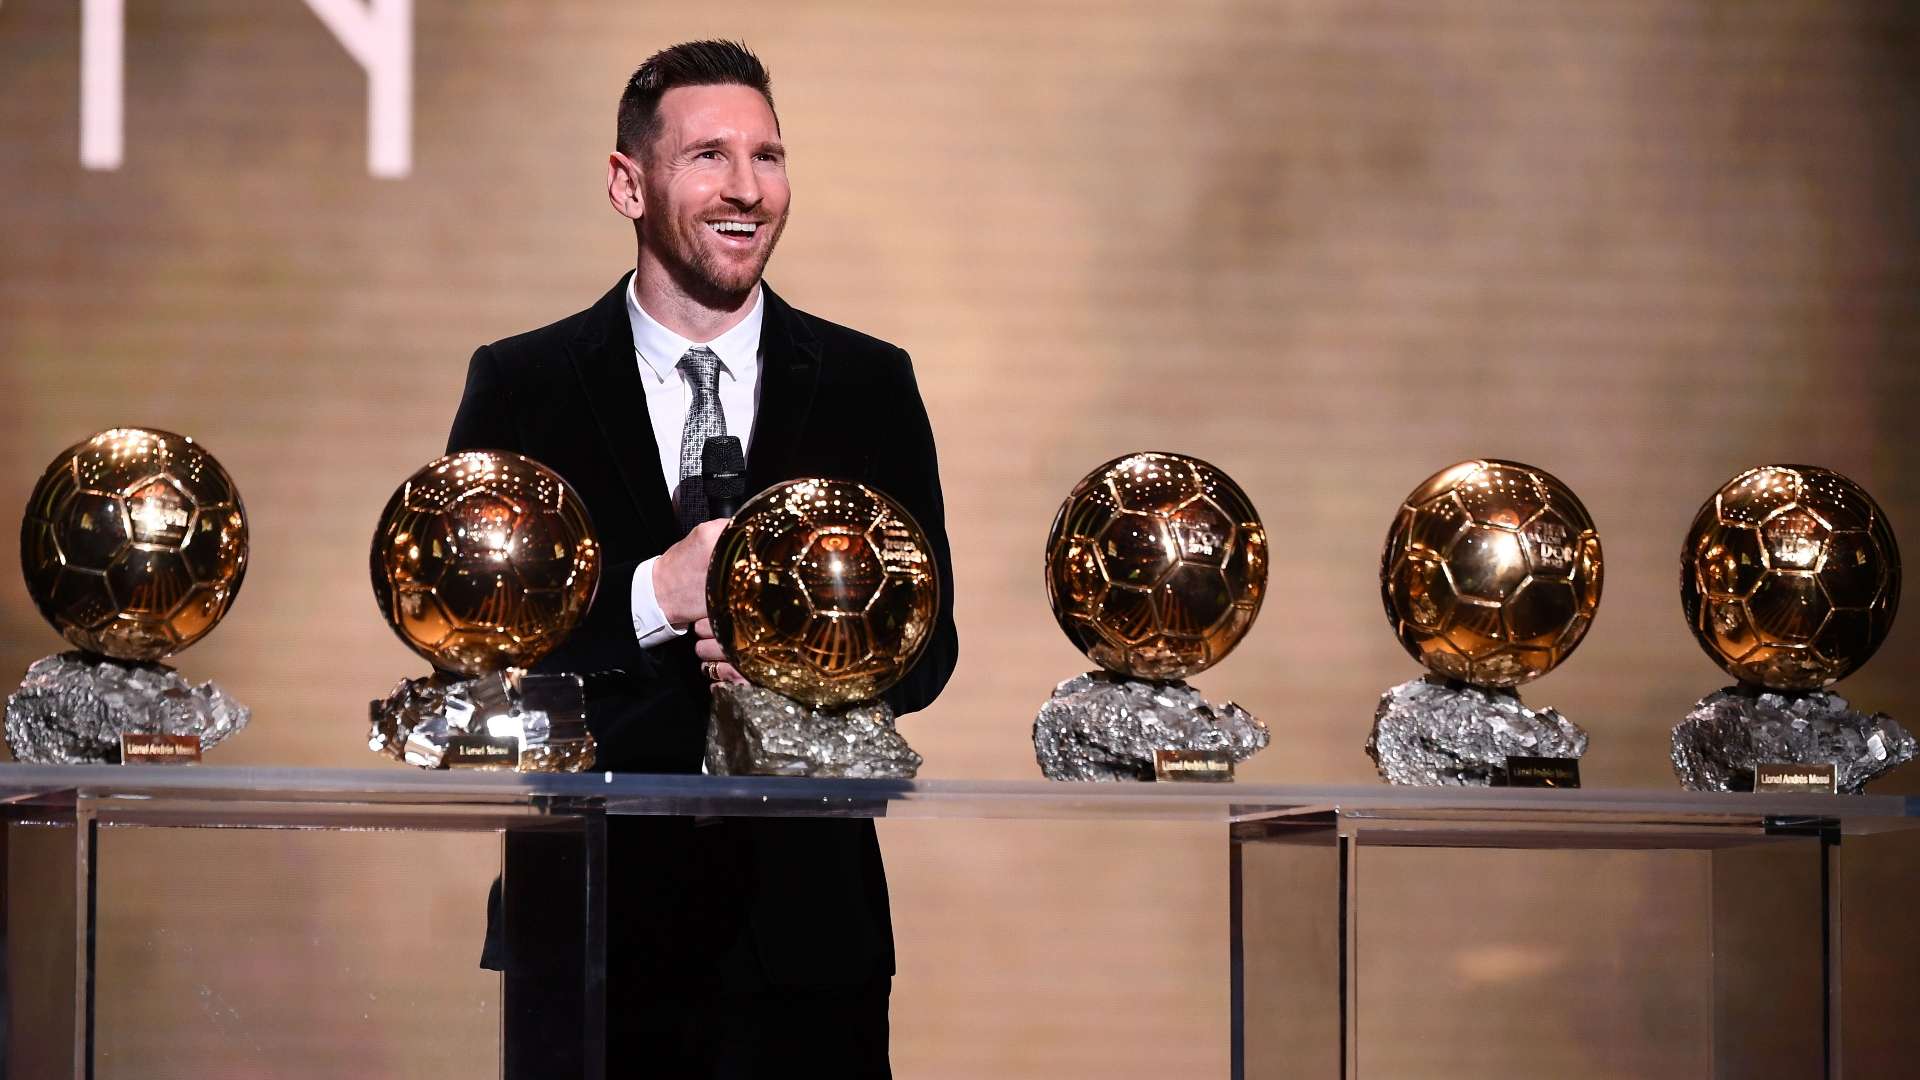 Undisputed Goat: GWR Praises Lionel Messi After 8th Ballon d'Or Win